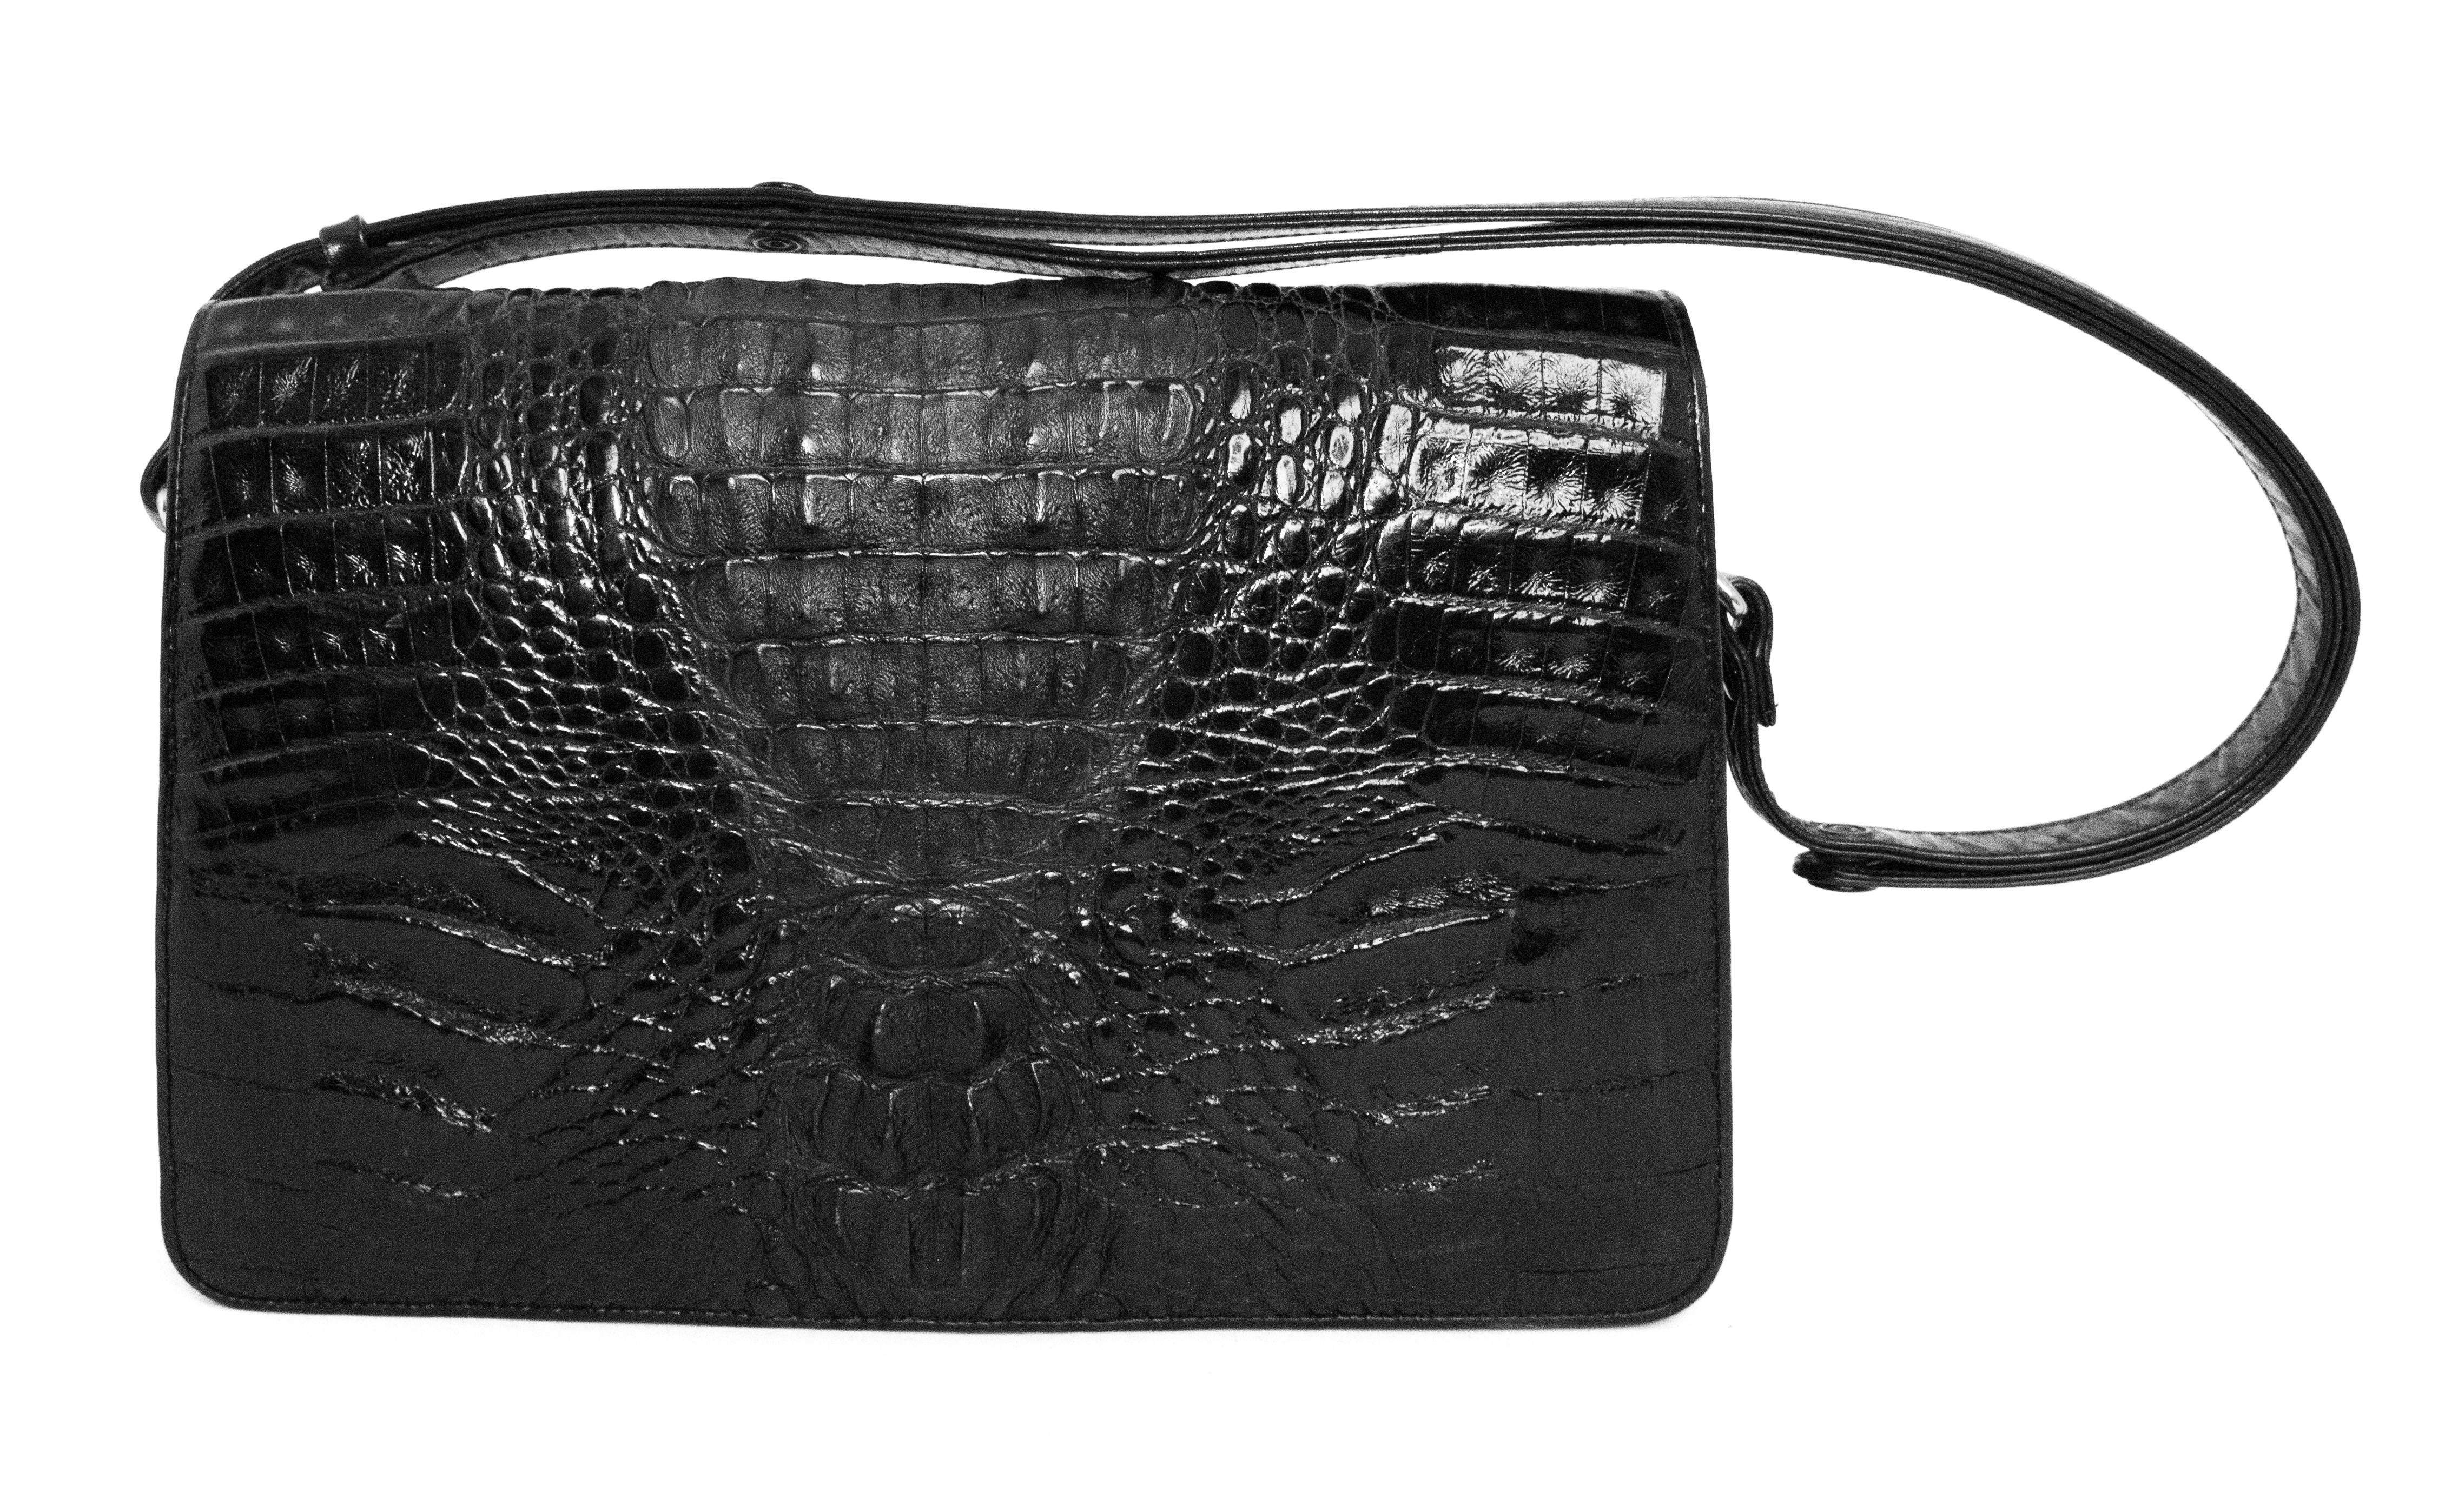 1980s hornback alligator purse in a true black. Gold toned hardware. Front opening flap with magnetic closure. Leather lining. Two main compartments, one zippered compartment, one side pocket. Snap closures on strap allows for conversion between top